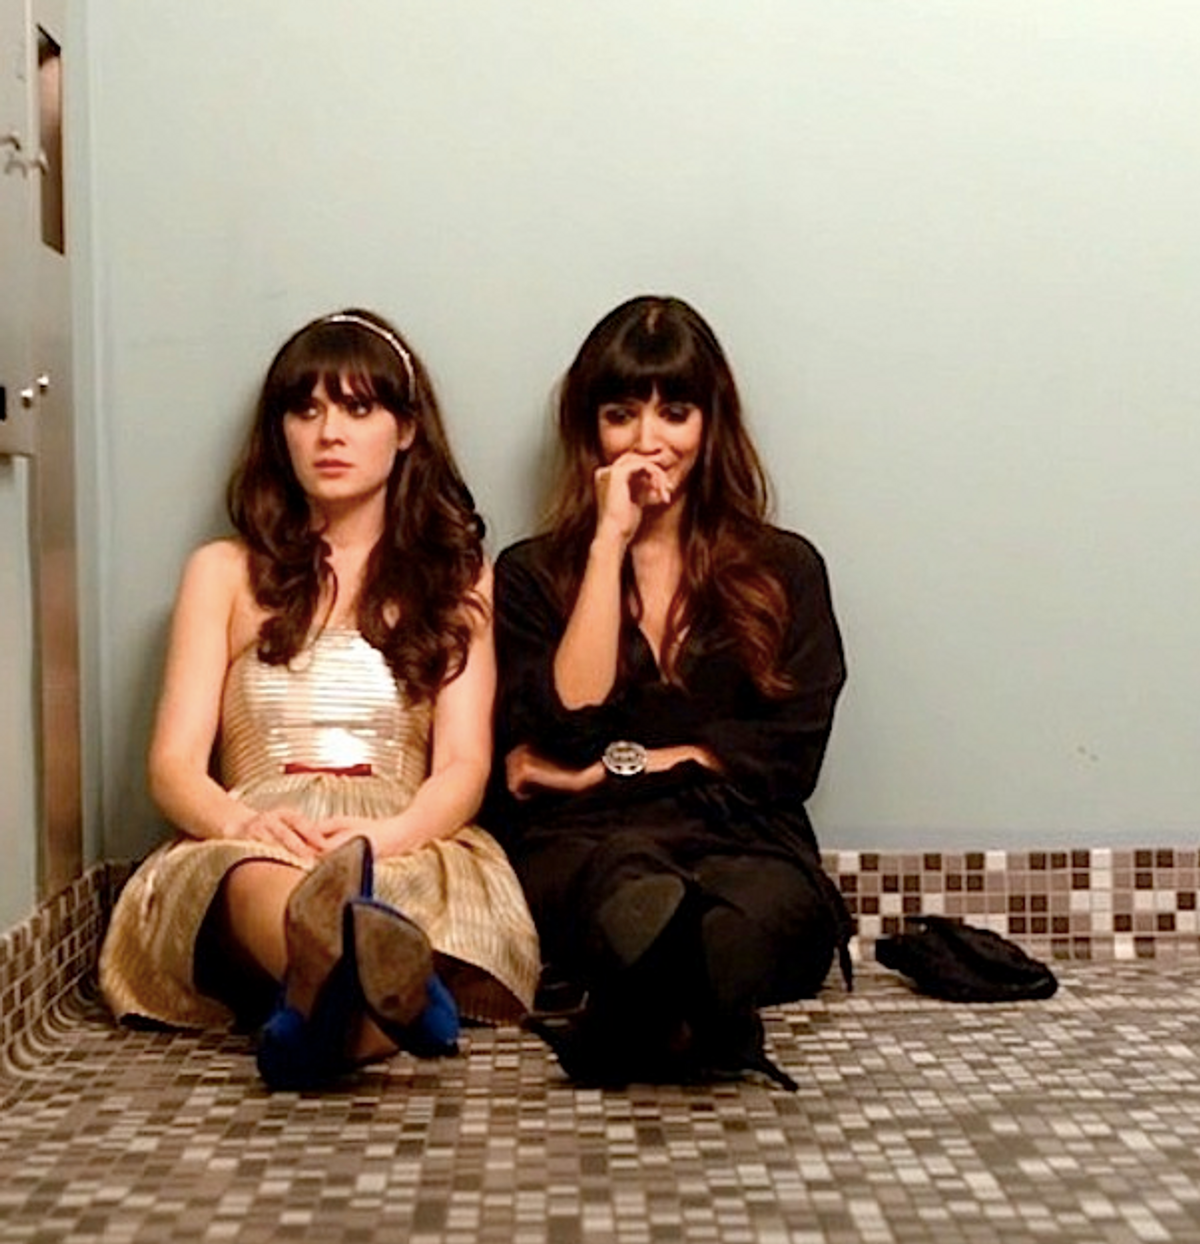 9 Things We All Do With Our Best Friends As Told By 'New Girl' Characters